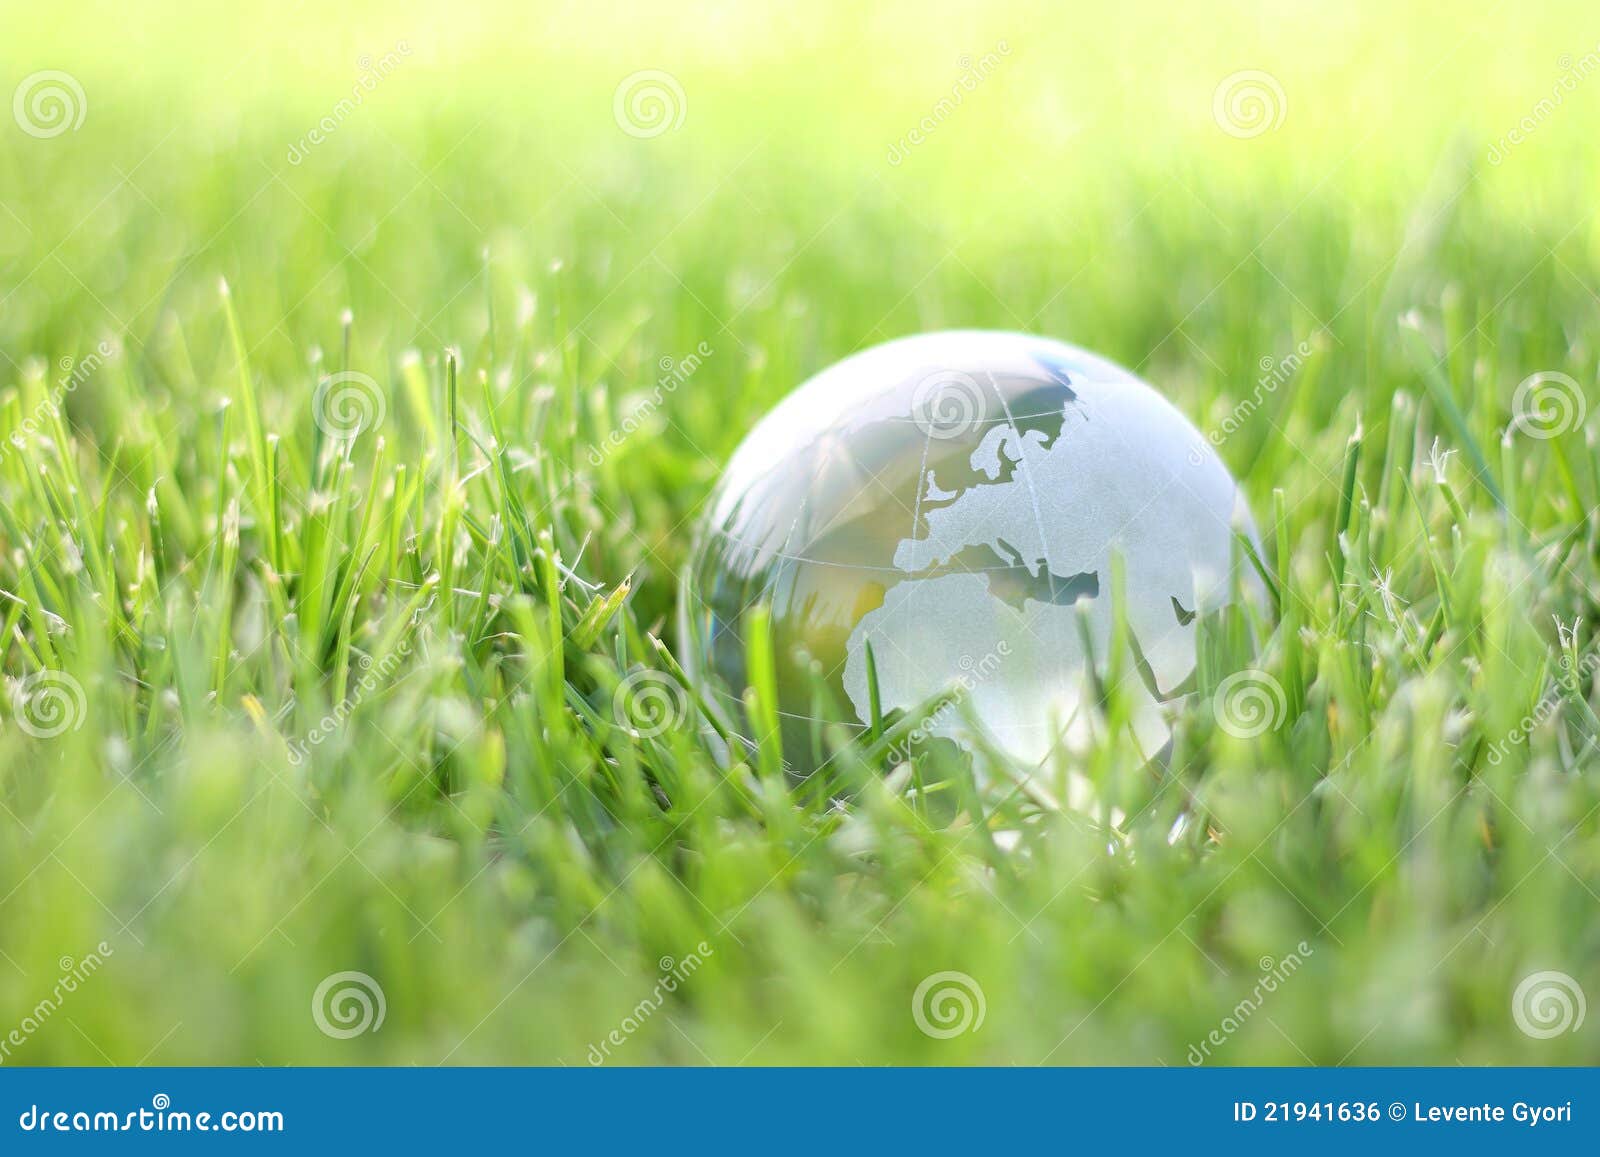 38,804 Bio Grass Photos Free & Royalty-Free Stock Photos from Dreamstime